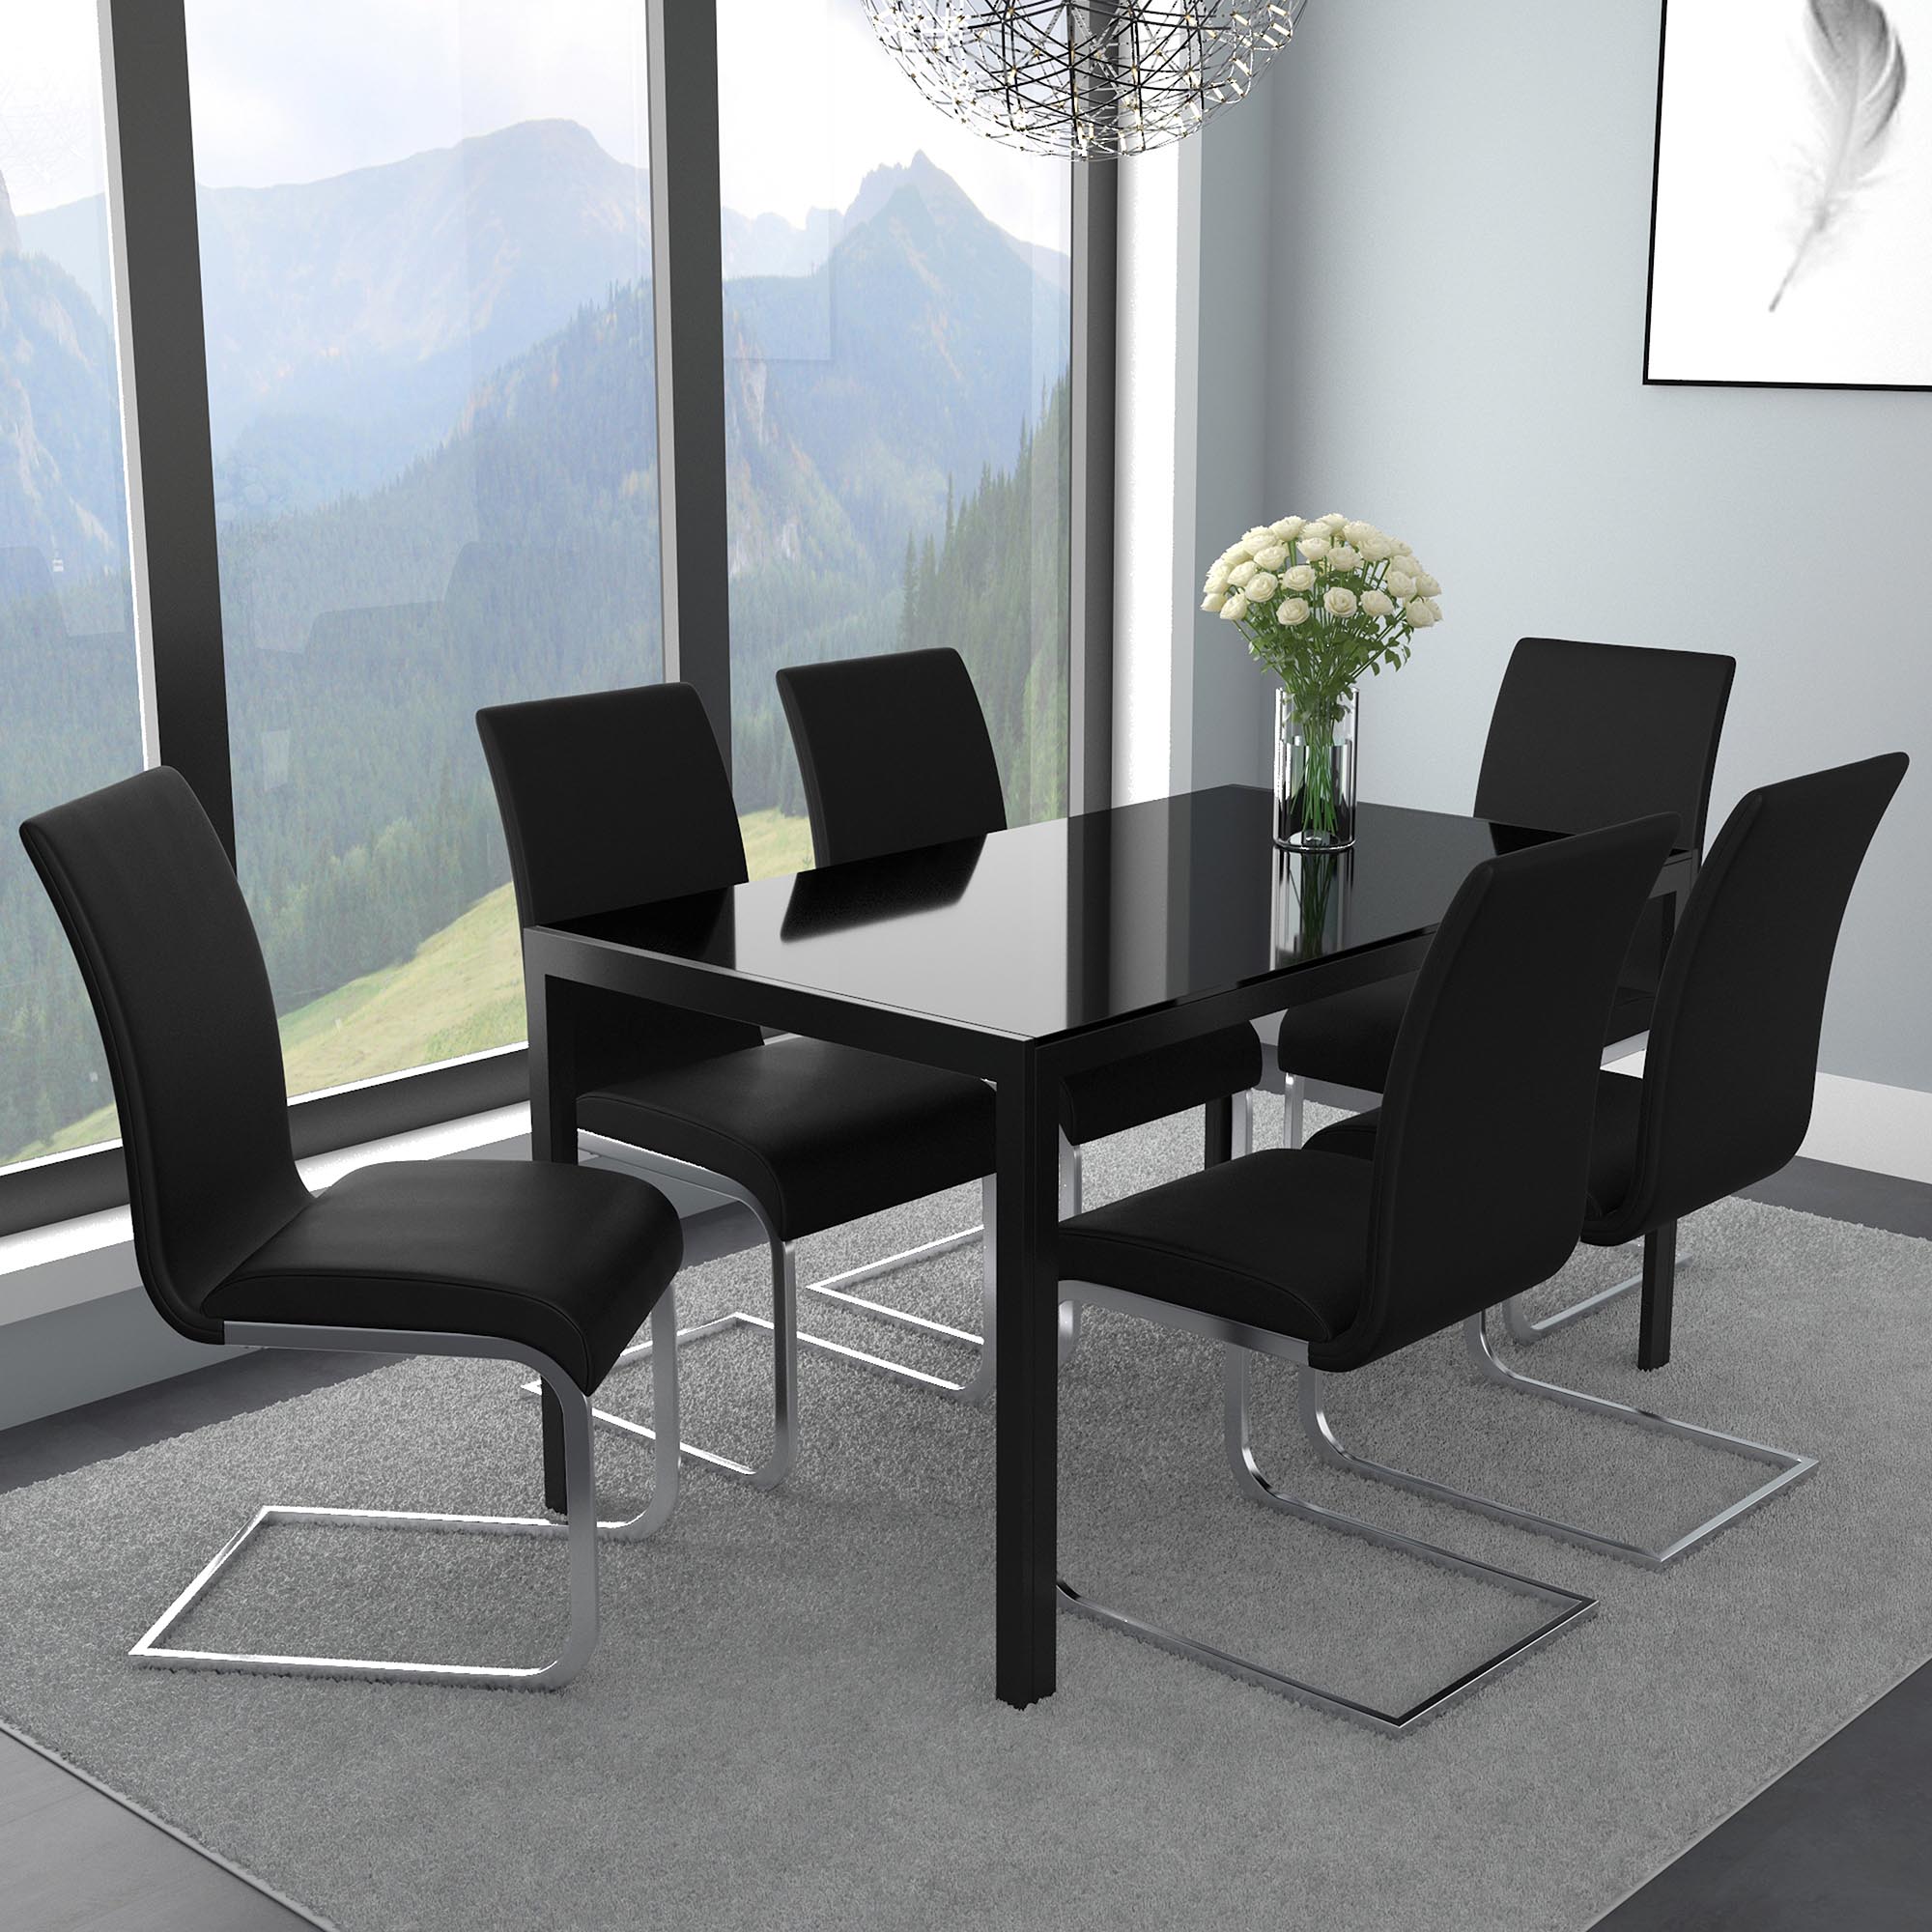 CONTRA 55" BLACK GLASS TABLE / MAXIM BLACK CHAIRS - 7PC DINING SET